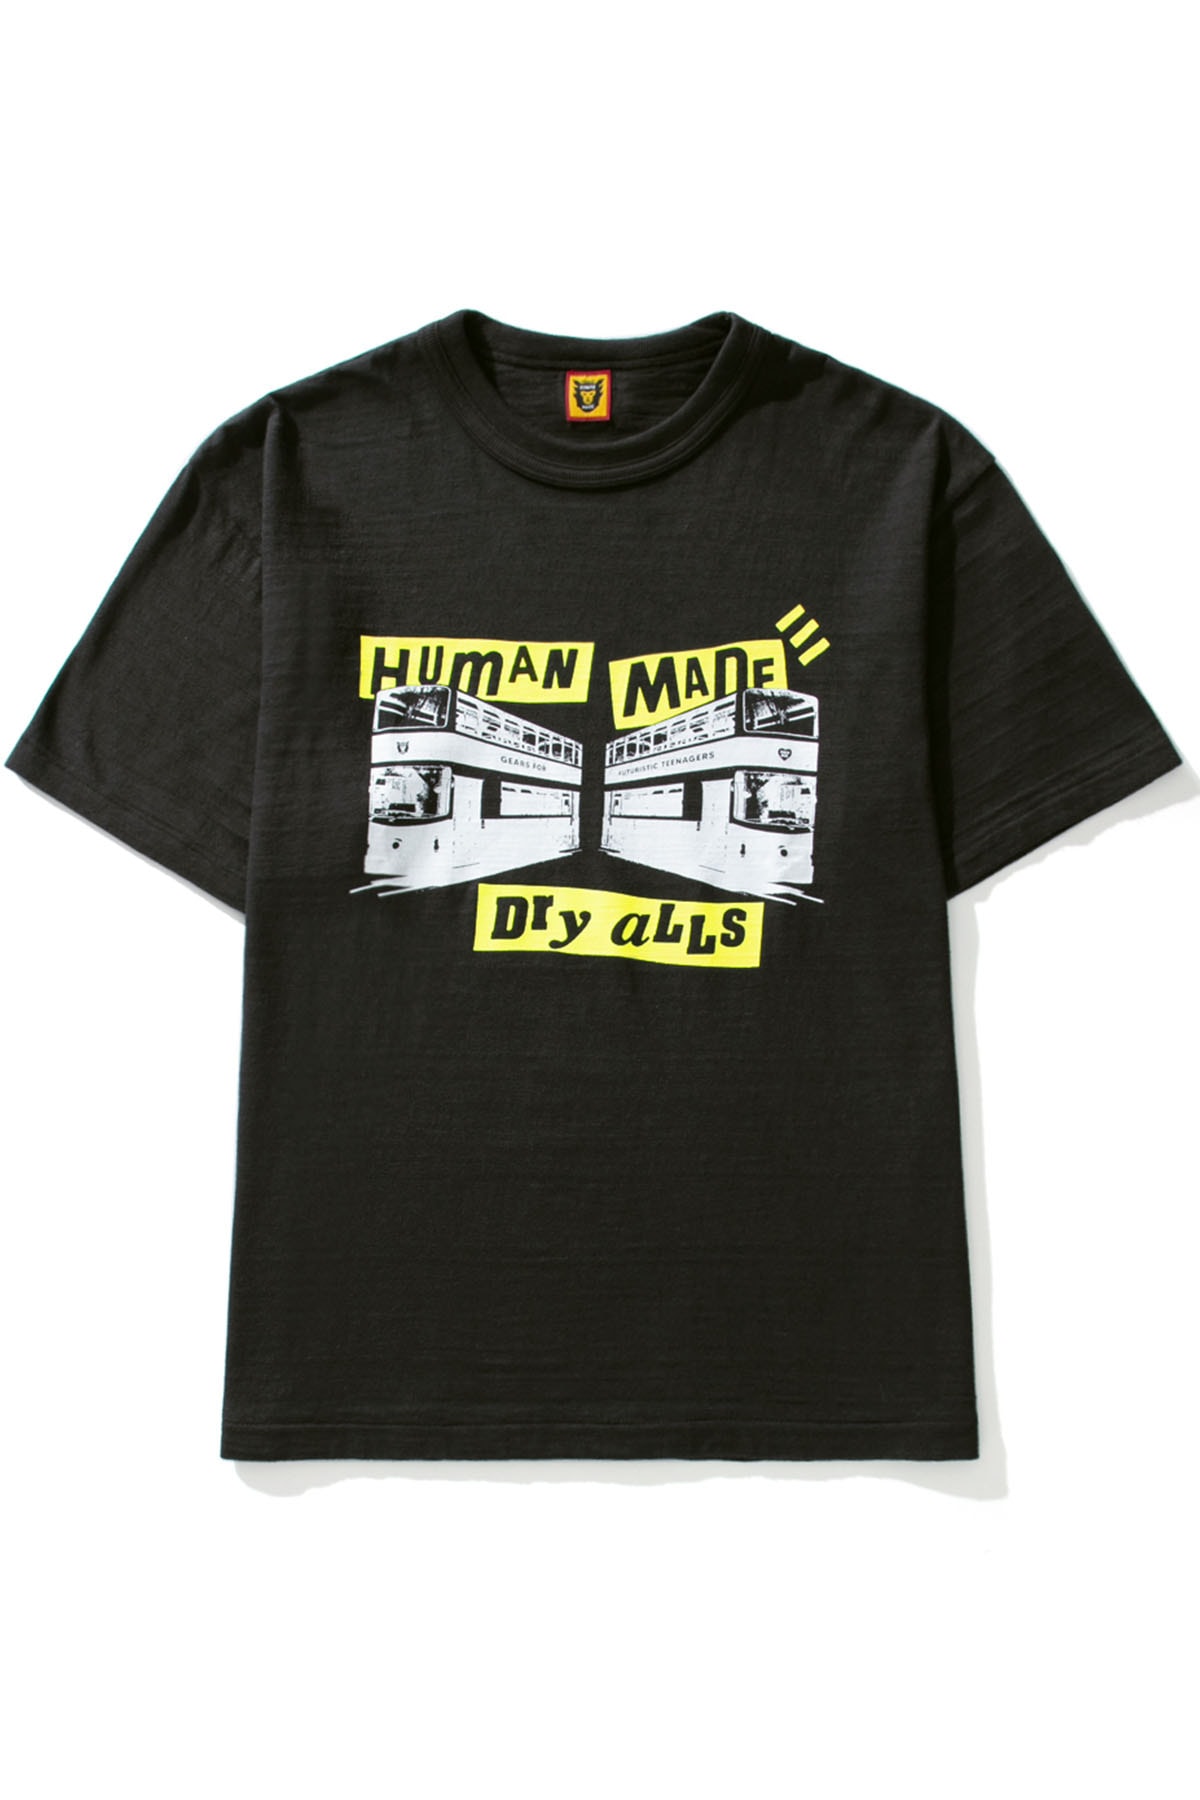 HBX からニゴーの手掛けるヒューマンメイドとの限定コラボTシャツの新色が登場　HUMAN MADE and HBX are collaborating again on a new limited edition black tram t-shirt